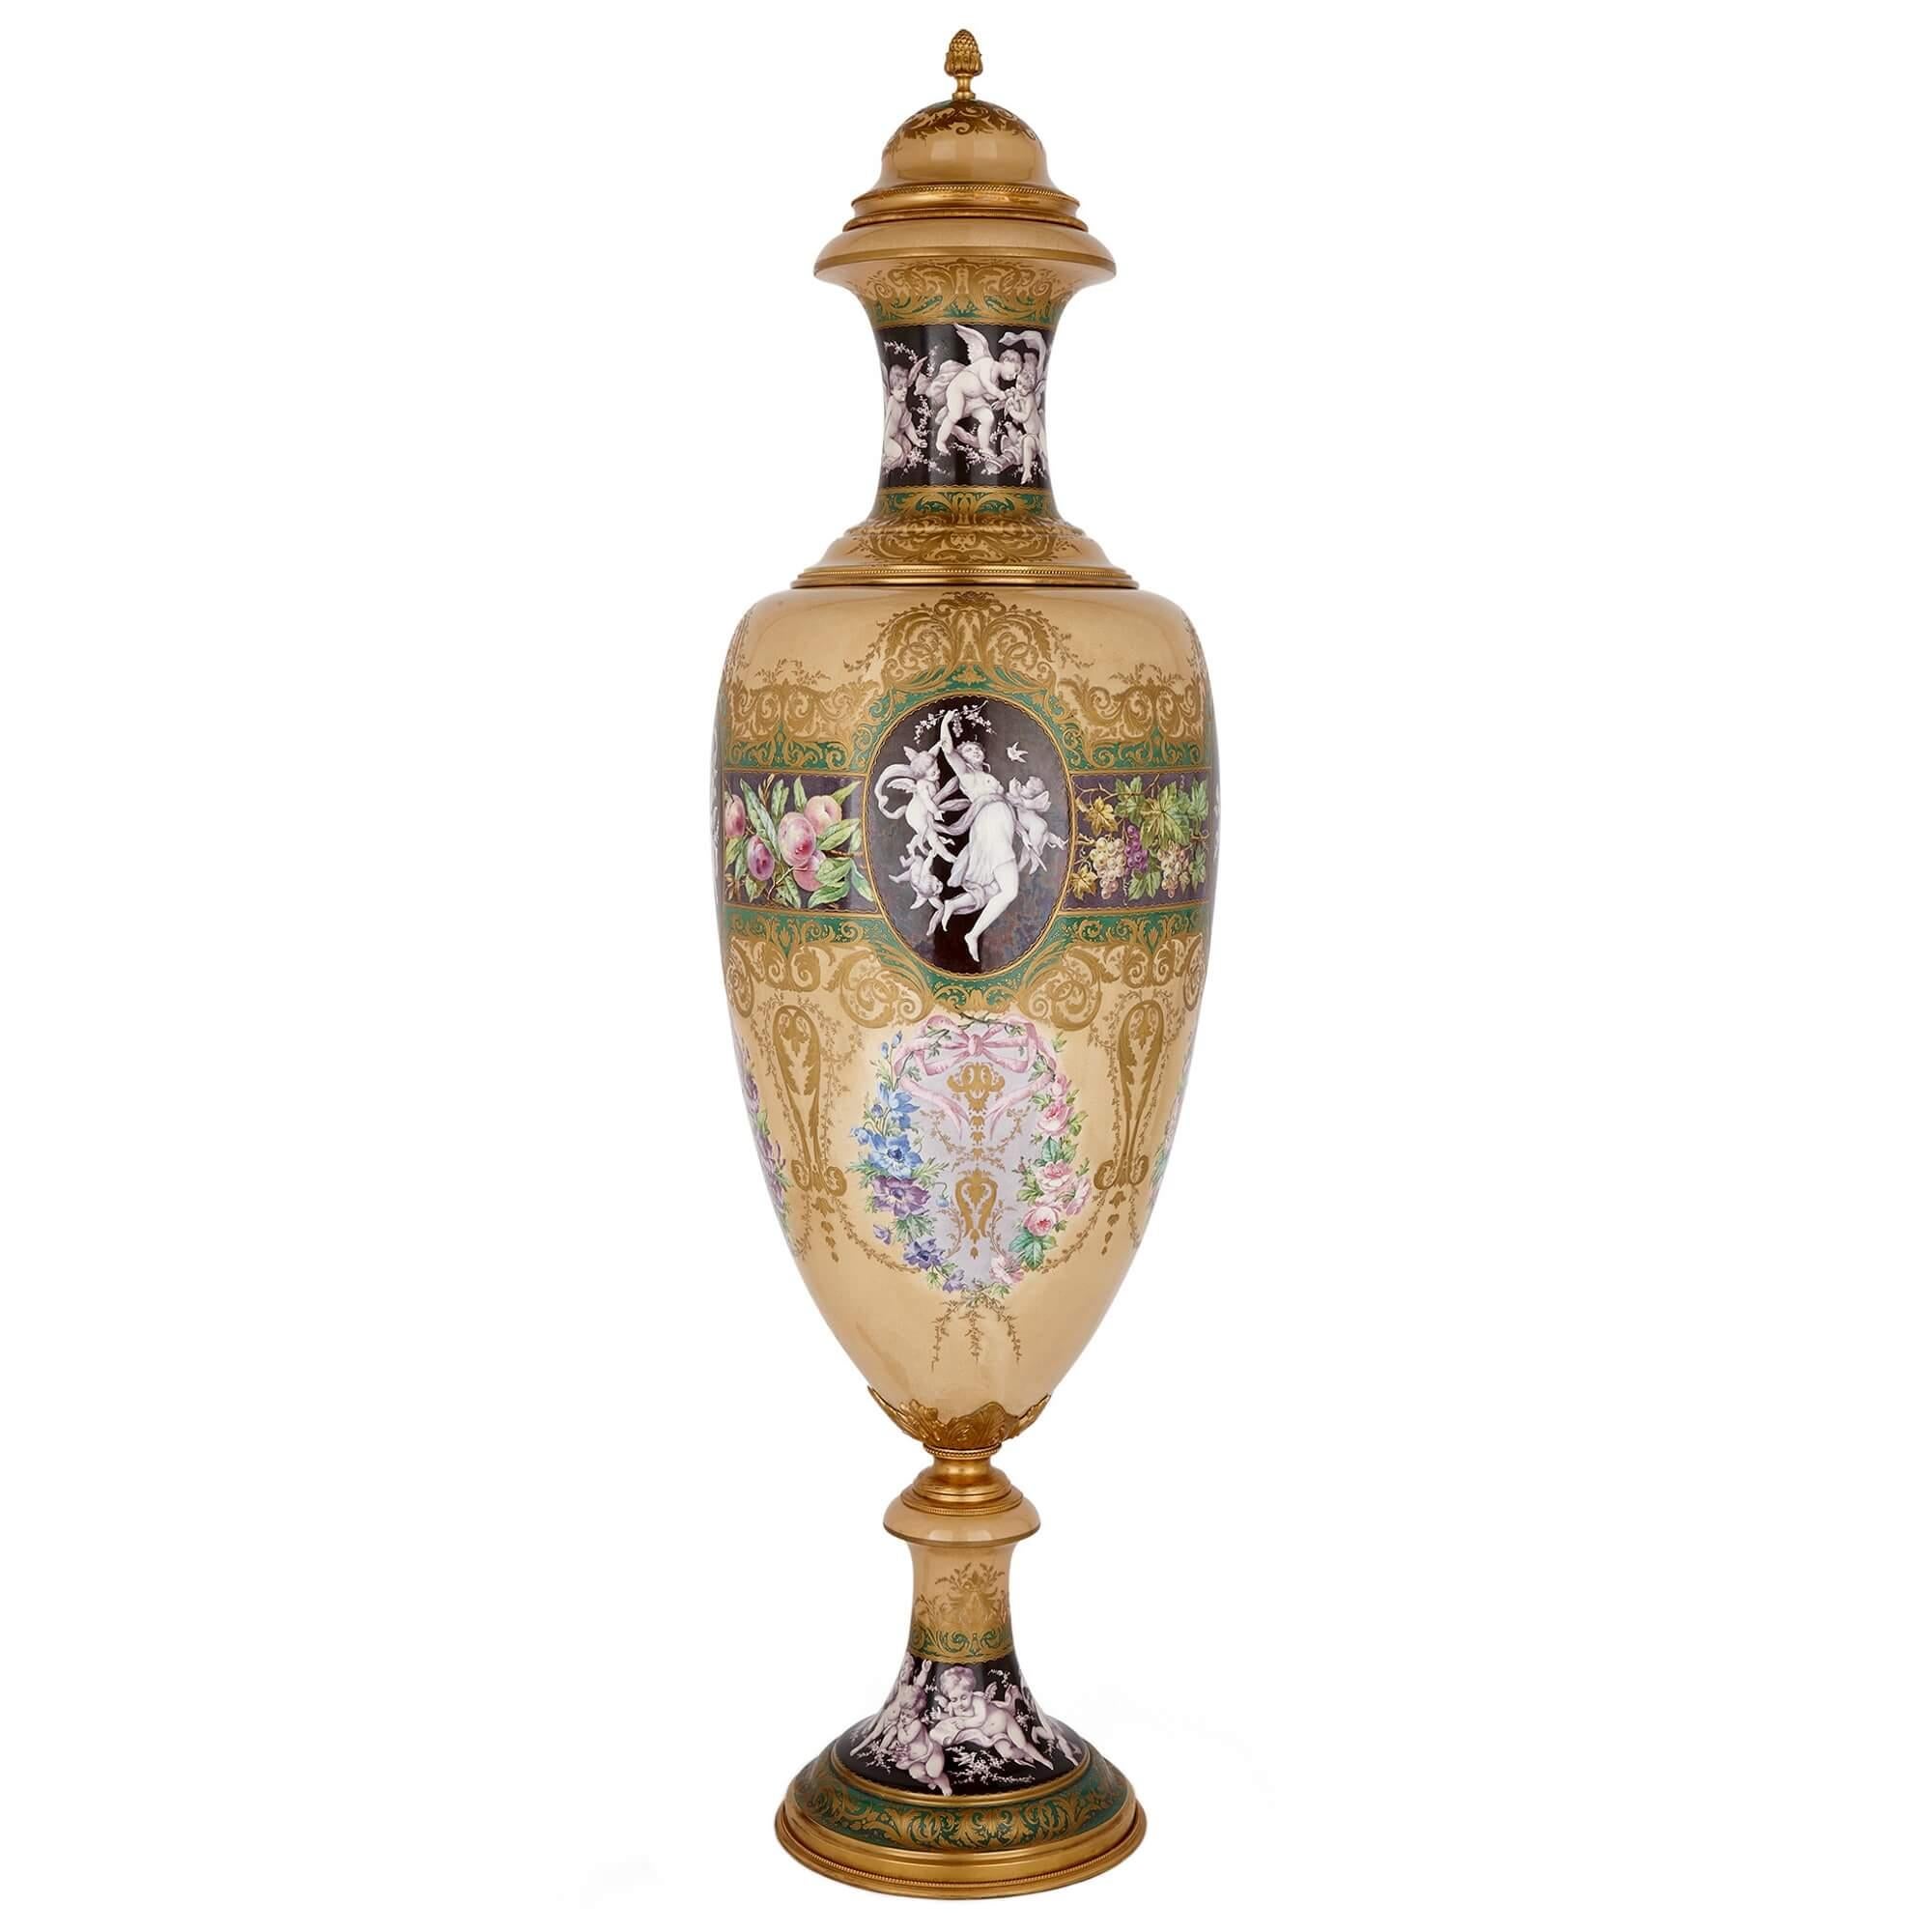 Monumental Sèvres style ormolu mounted porcelain vase of the Four Seasons
French, c.1895
Height 152cm, diameter 45cm

Set on a polychrome ground, dominated by a rare and fitting beige ground, which is accentuated and banded with strips in green,